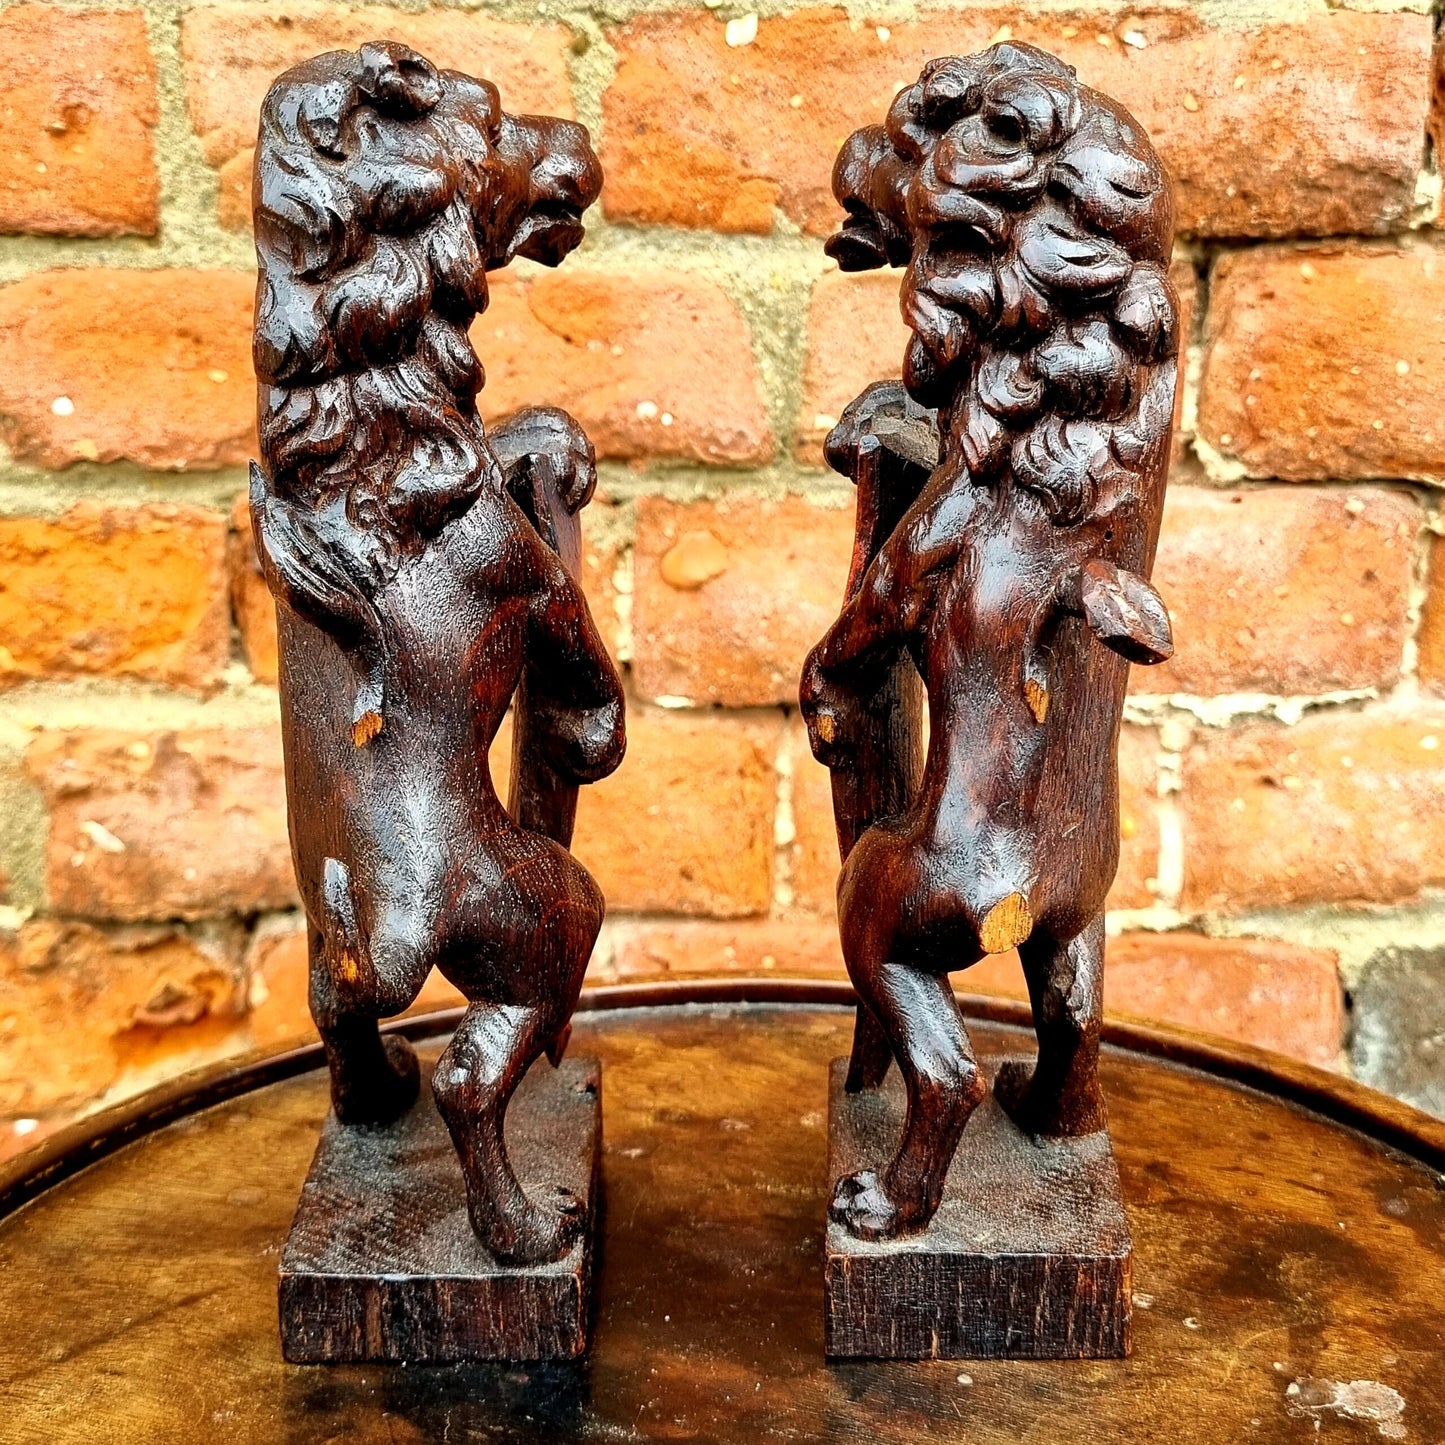 Pair of 19th Century Gothic Revival Antique Carved Oak Rampant Lions Bearing Polychromed Shields with the Initials "R" & "H"